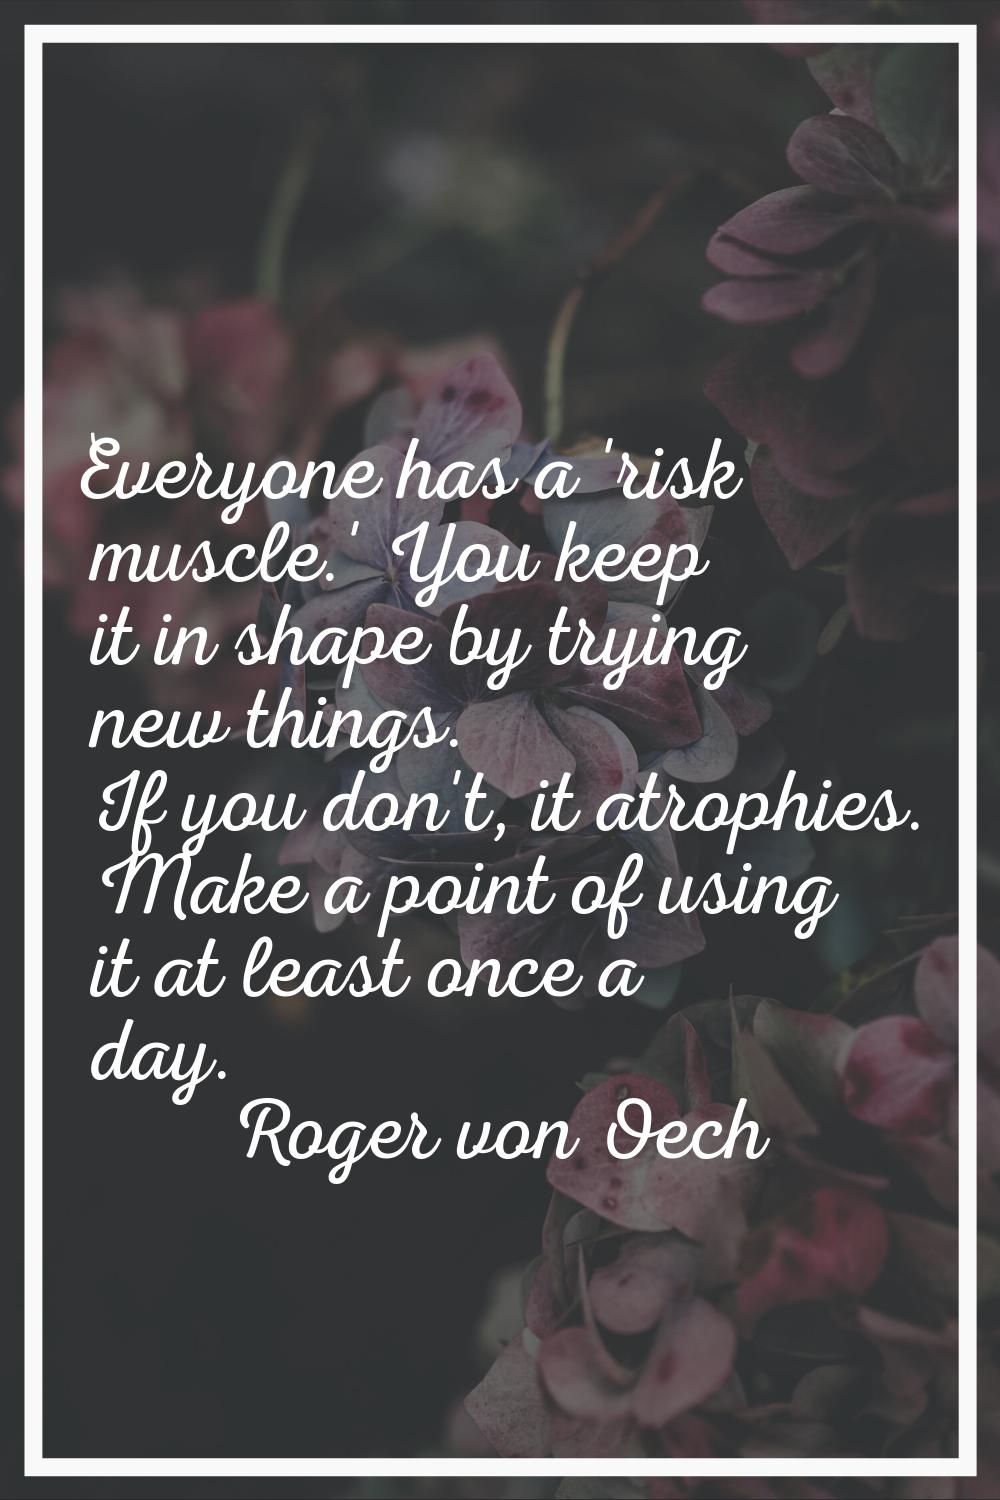 Everyone has a 'risk muscle.' You keep it in shape by trying new things. If you don't, it atrophies